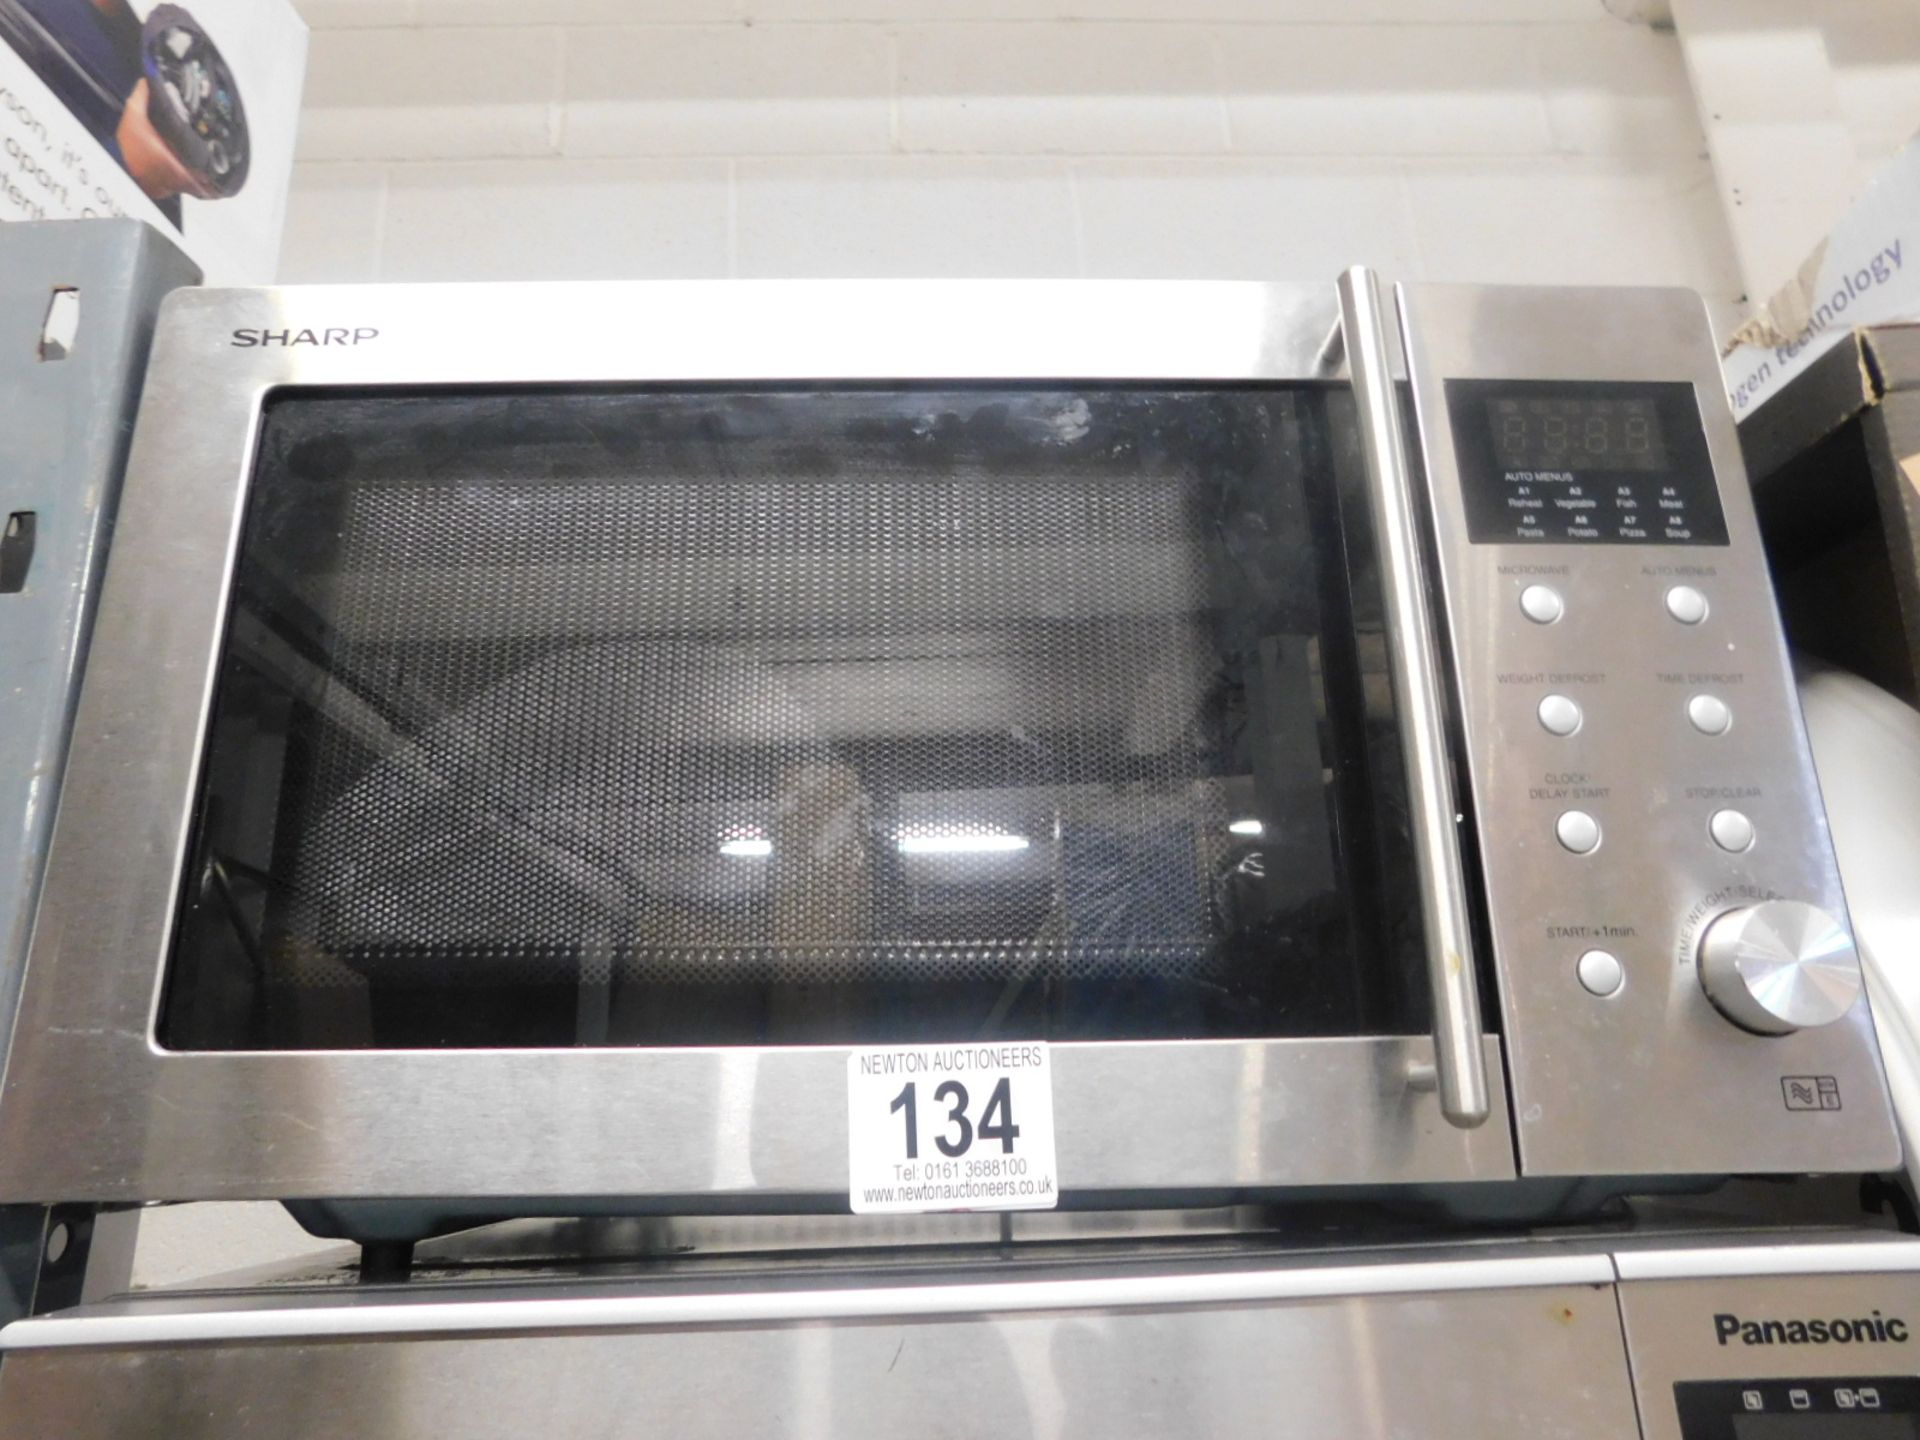 1 SHARP SOLO 23 LITRE STAINLESS STEEL MICROWAVE OVEN RRP £179.99